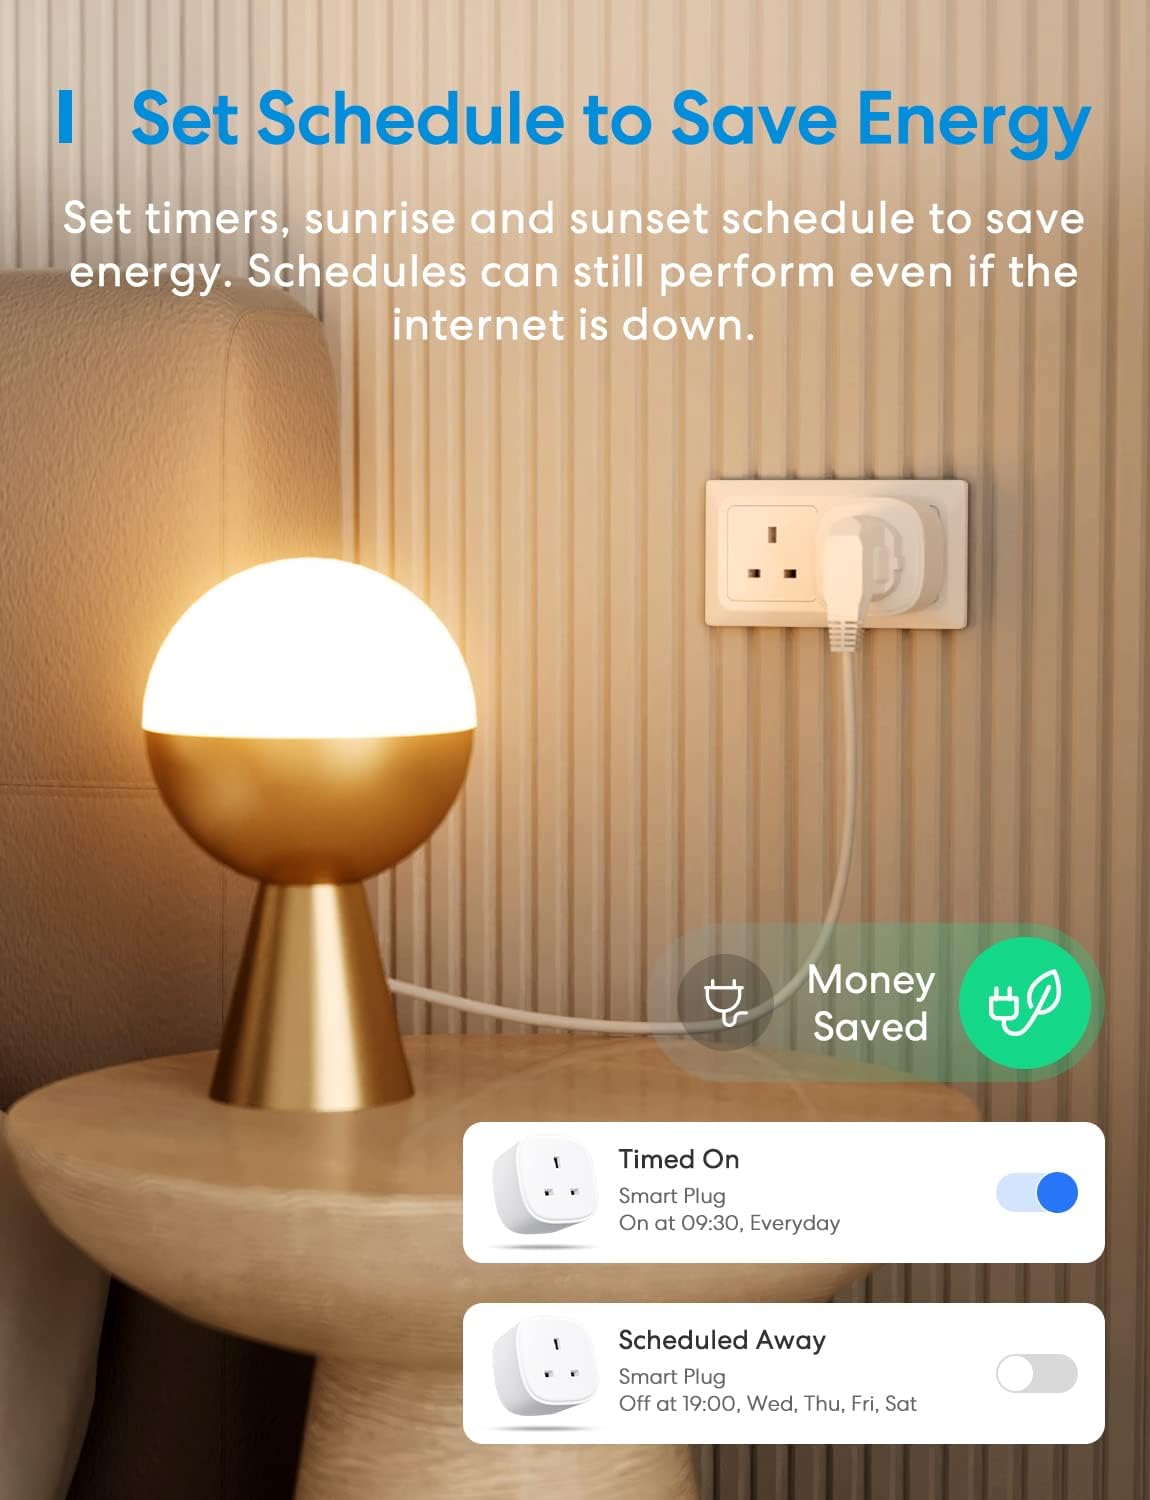 Meross Smart Plug Remote Control Plug Socket UK Smart Plugs that Work with Alexa, Google Home, 13A Wireless Alexa Plug, Timer & Schedule Function, Device Sharing, No Hub Required (4 Pack) 7931